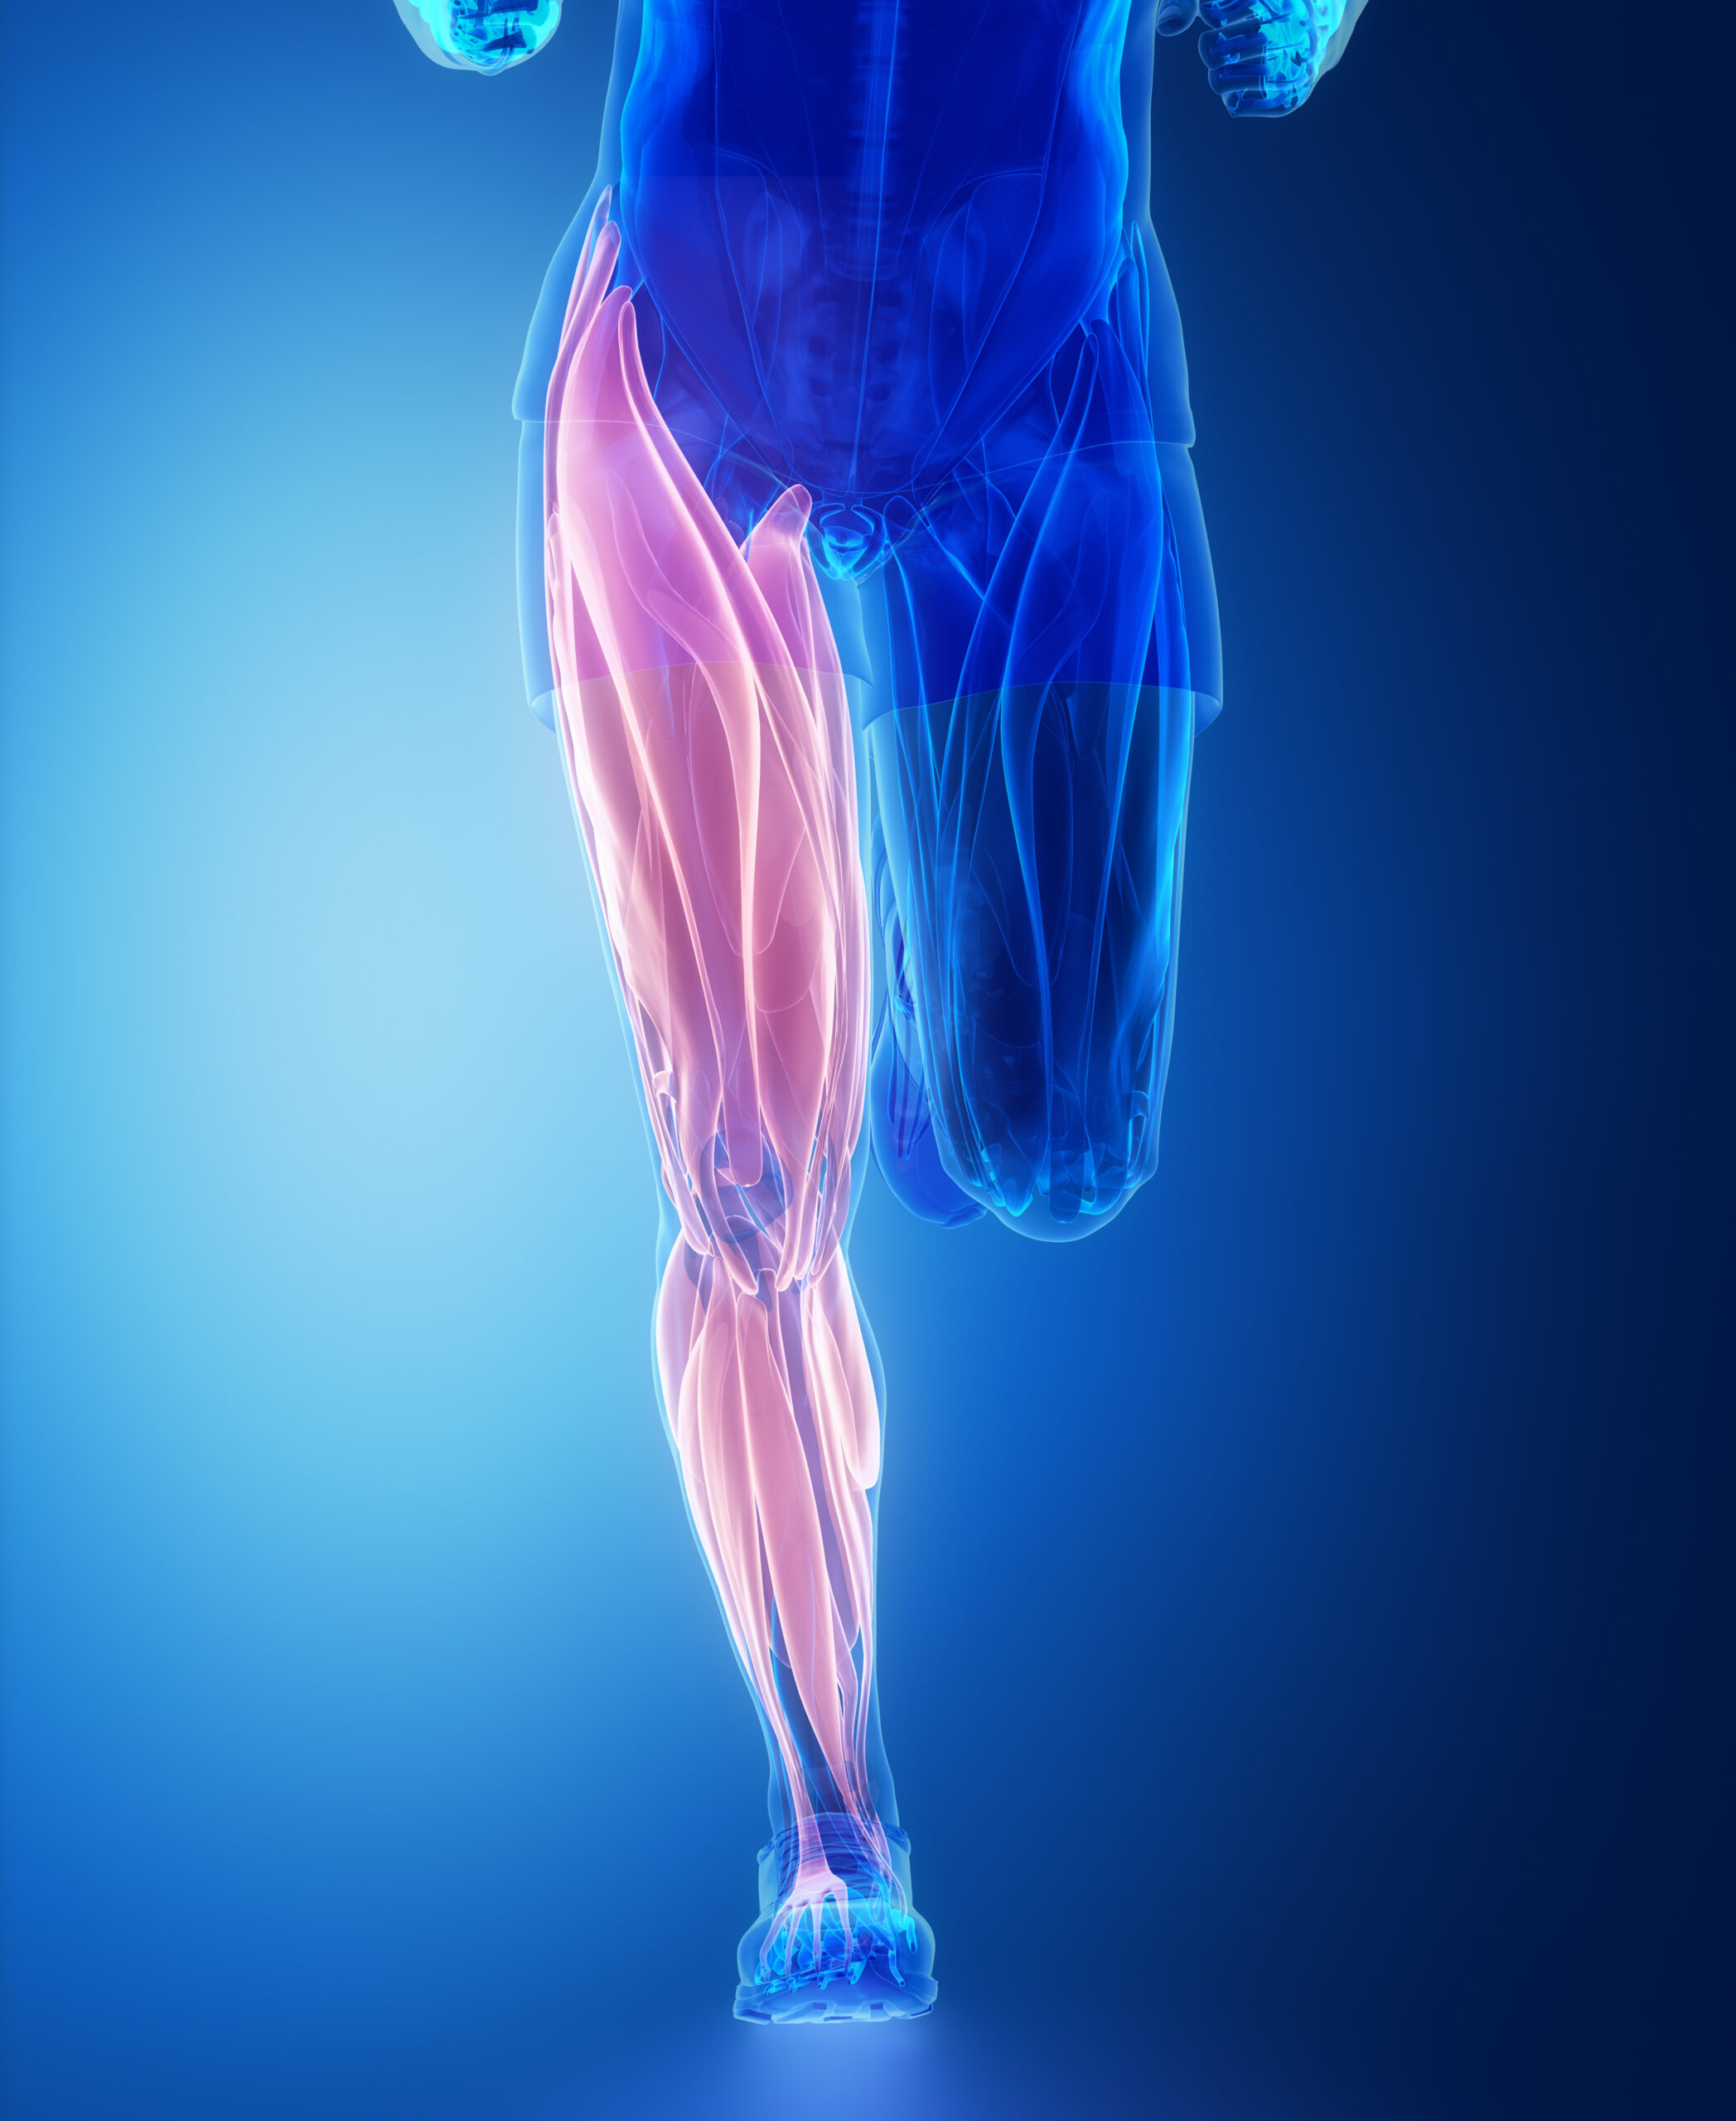 Highlighted muscles of the upper and lower leg in motion before sustaining severe leg cramps.